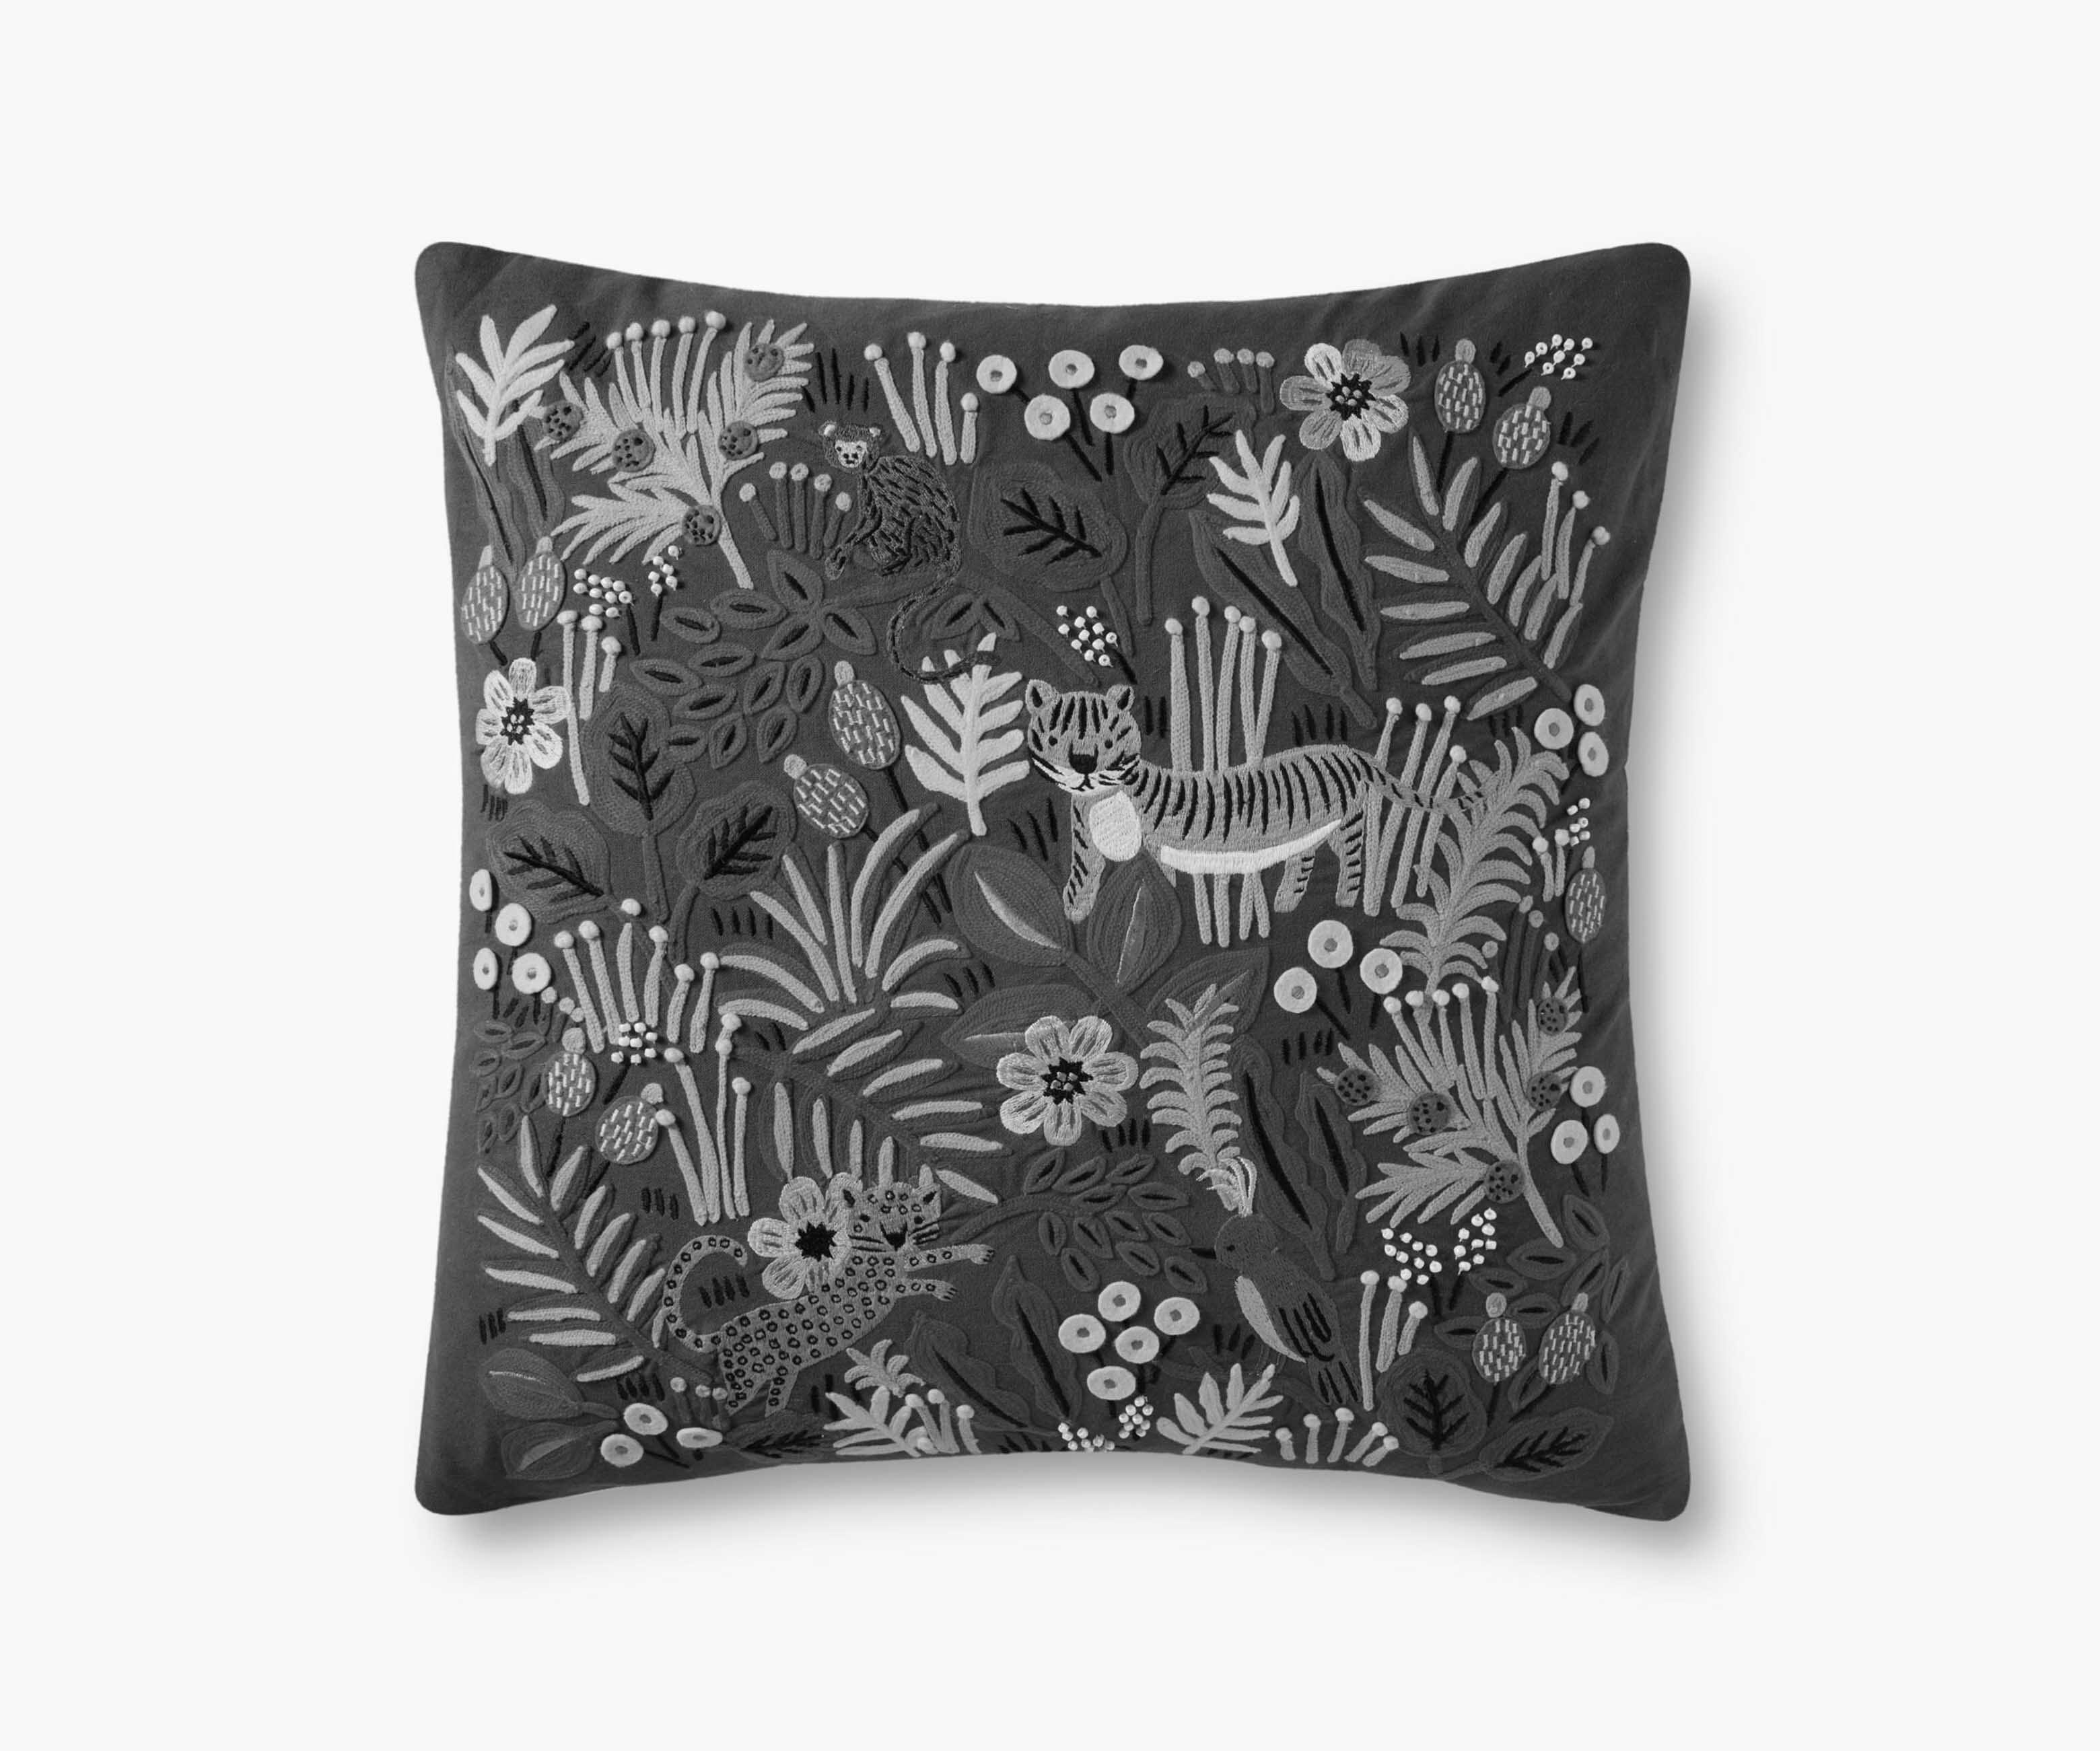 Kids - Pillows & Throws - Home | Rifle Paper Co.